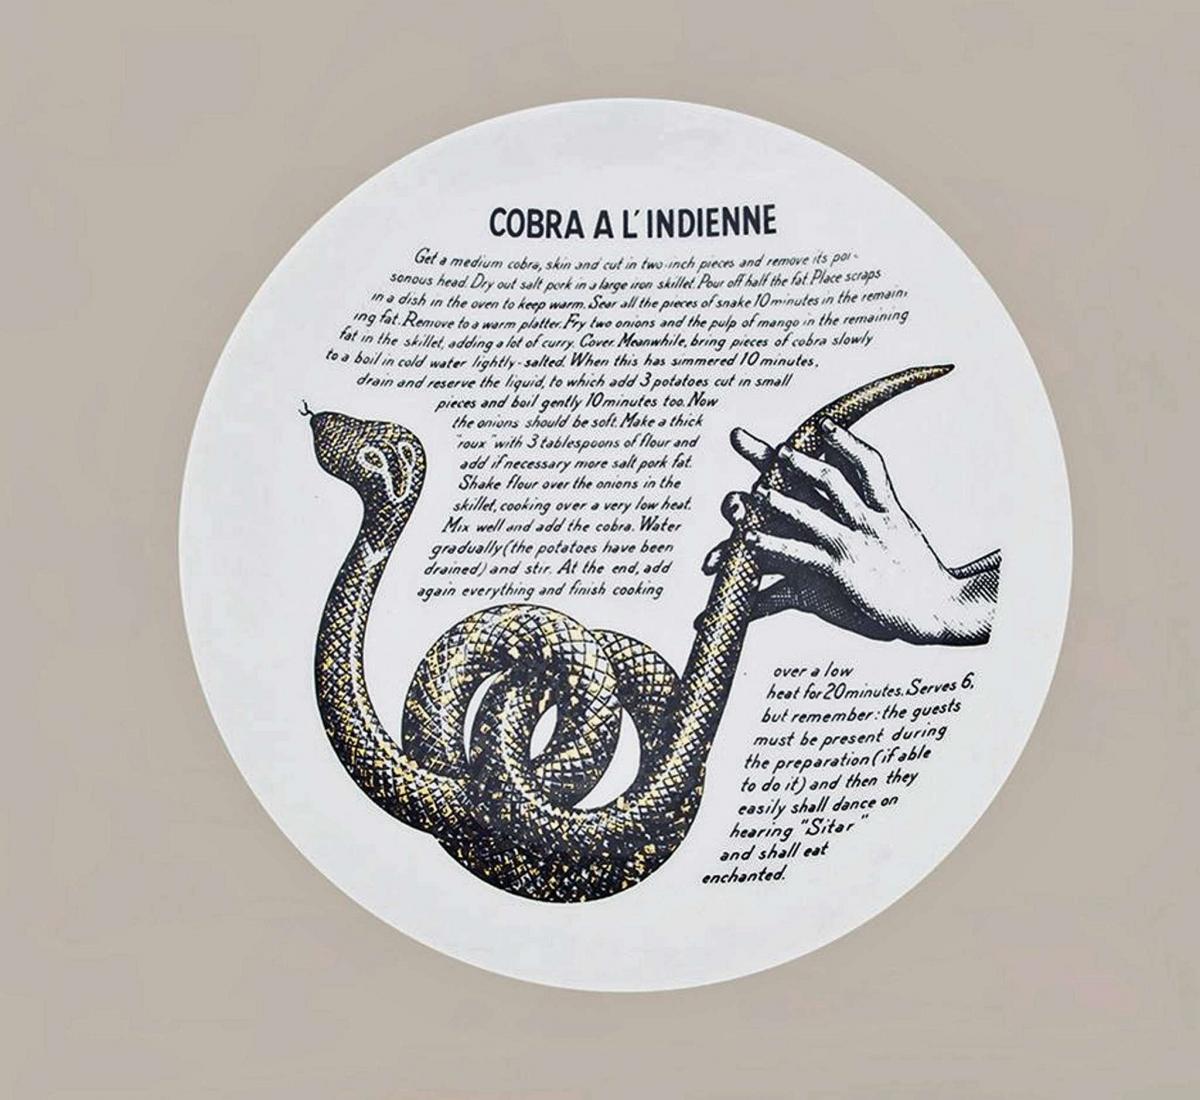 Vintage Piero Fornasetti Recipe Plate, Cobra A L'Indienne, Made for Fleming Joffe, Silkscreen & Transfer on Porcelain, 1960s